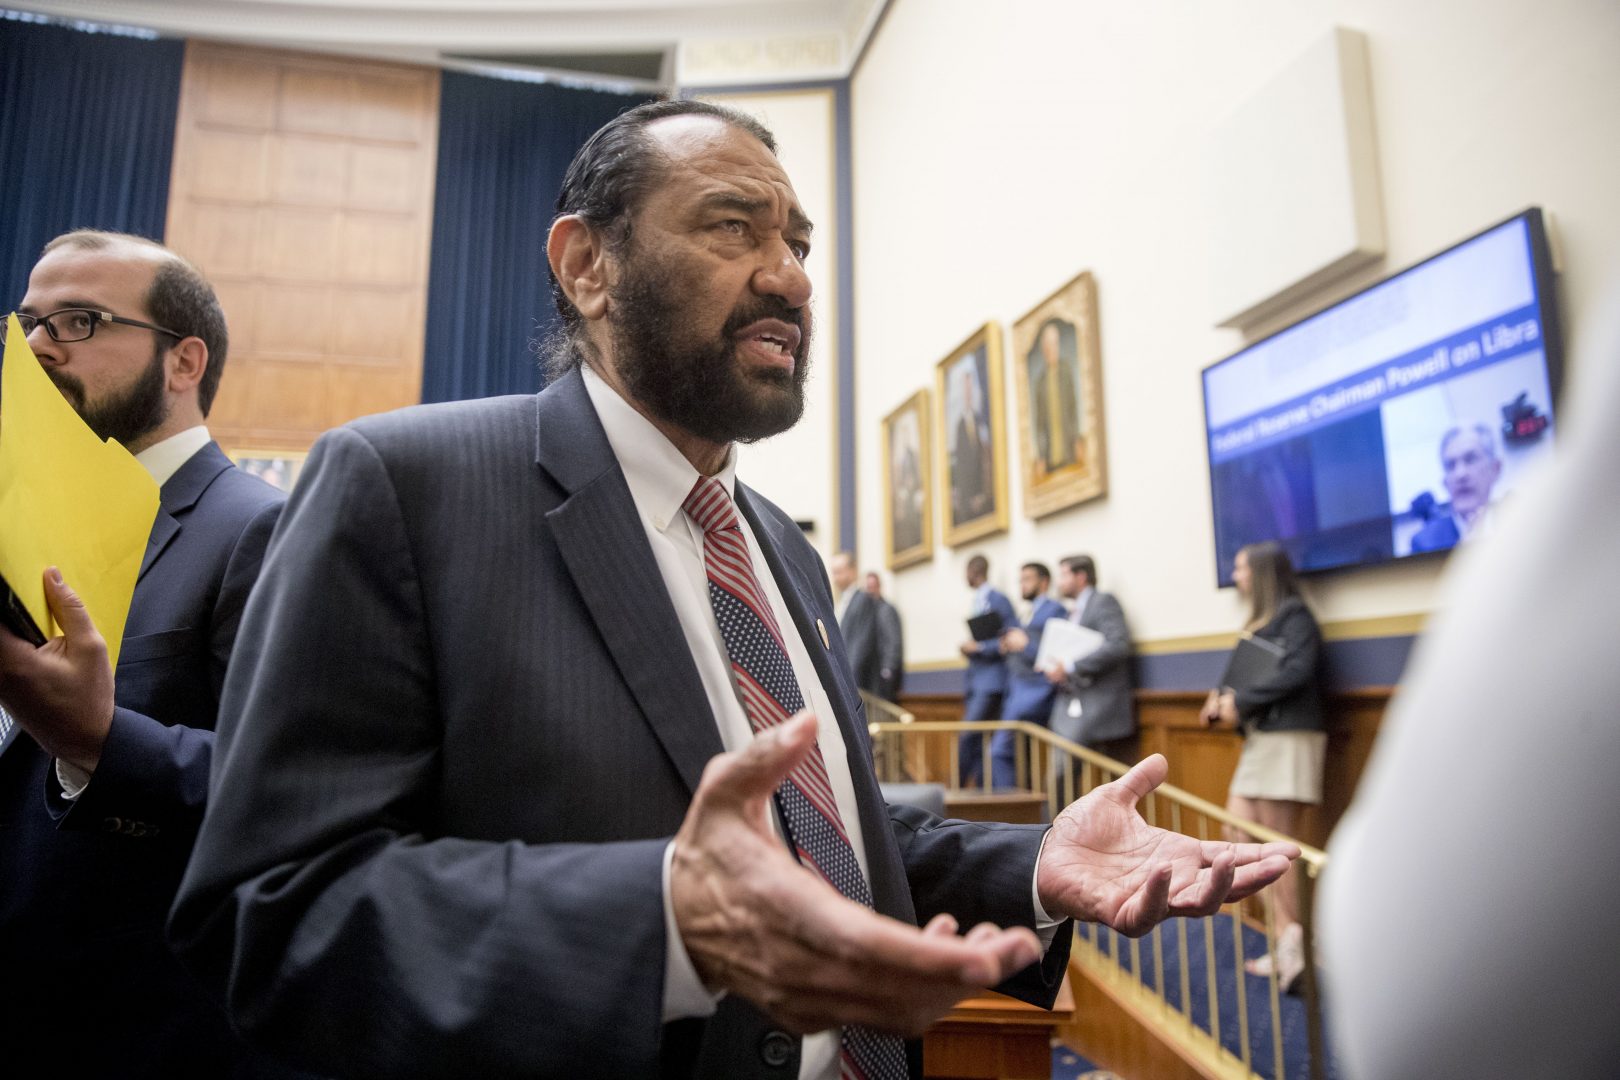 Rep. Al Green, D-Texas, right, speaks to visitors during a break from testimony from David Marcus, CEO of Facebook's Calibra digital wallet service, before a House Financial Services Committee hearing on Facebook's proposed cryptocurrency on Capitol Hill in Washington, Wednesday, July 17, 2019. Green has introduced a resolution in the House to impeach President Donald Trump.